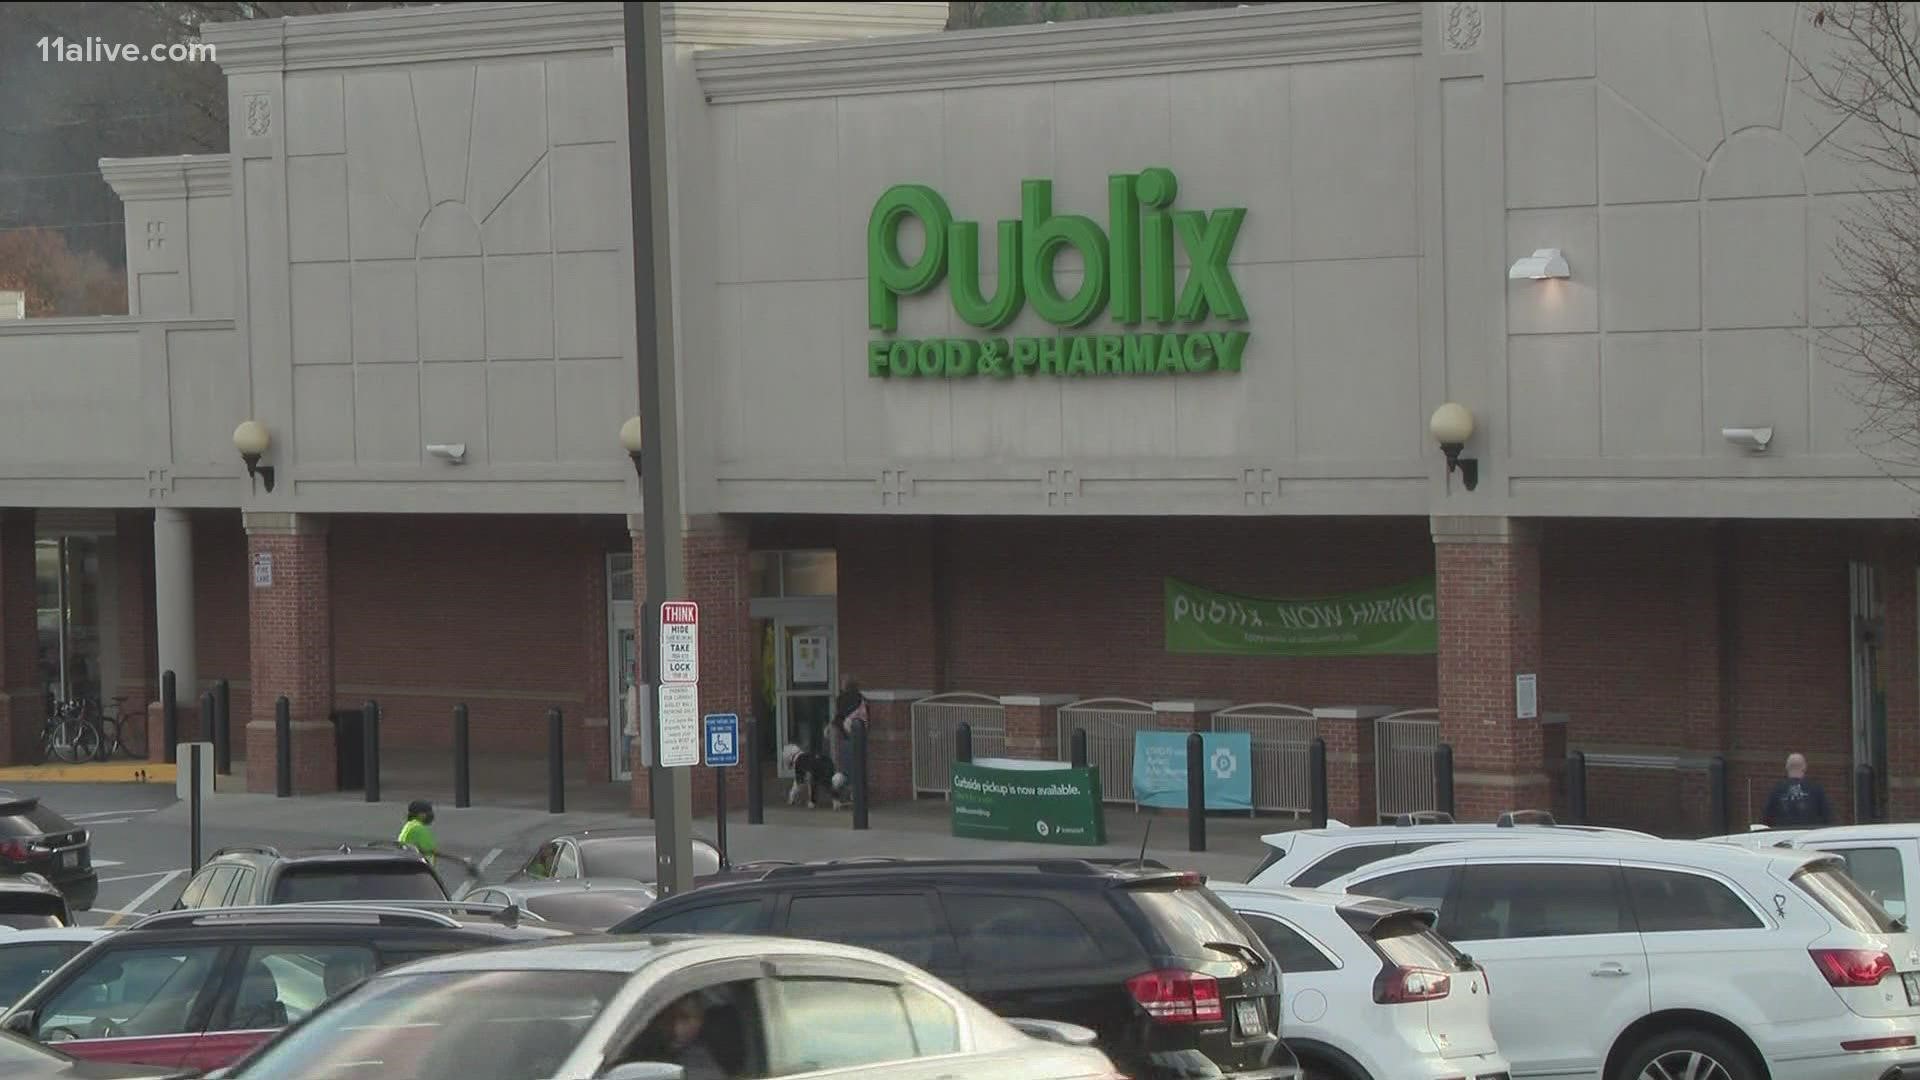 Police said they responded to 1544 Piedmont Road, which is the address of a Publix in the Ansley Mall shopping center.